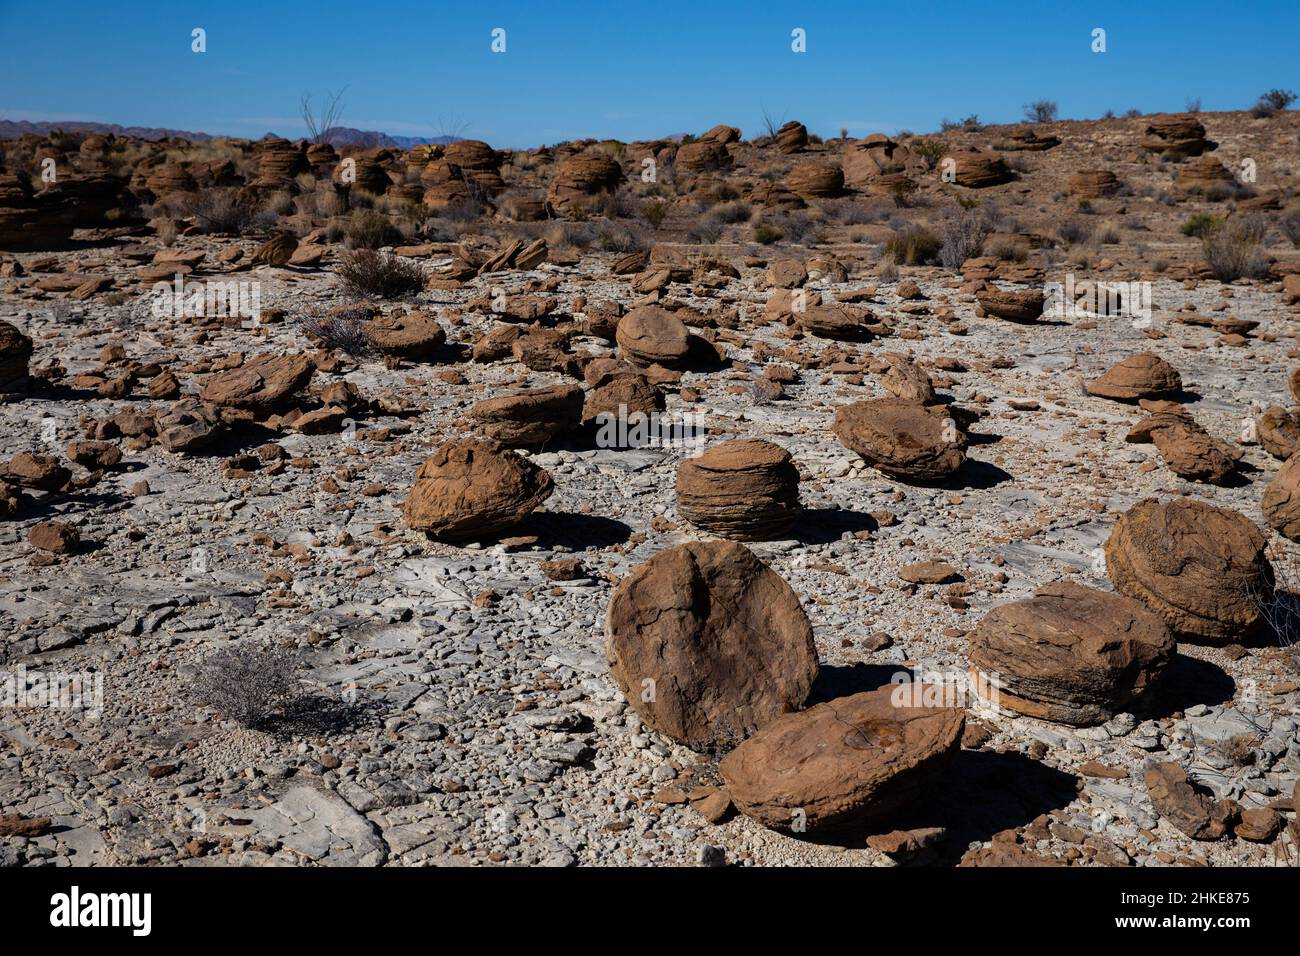 Concretions weathered out of Cretaceous deposits litter the ground. Stock Photo